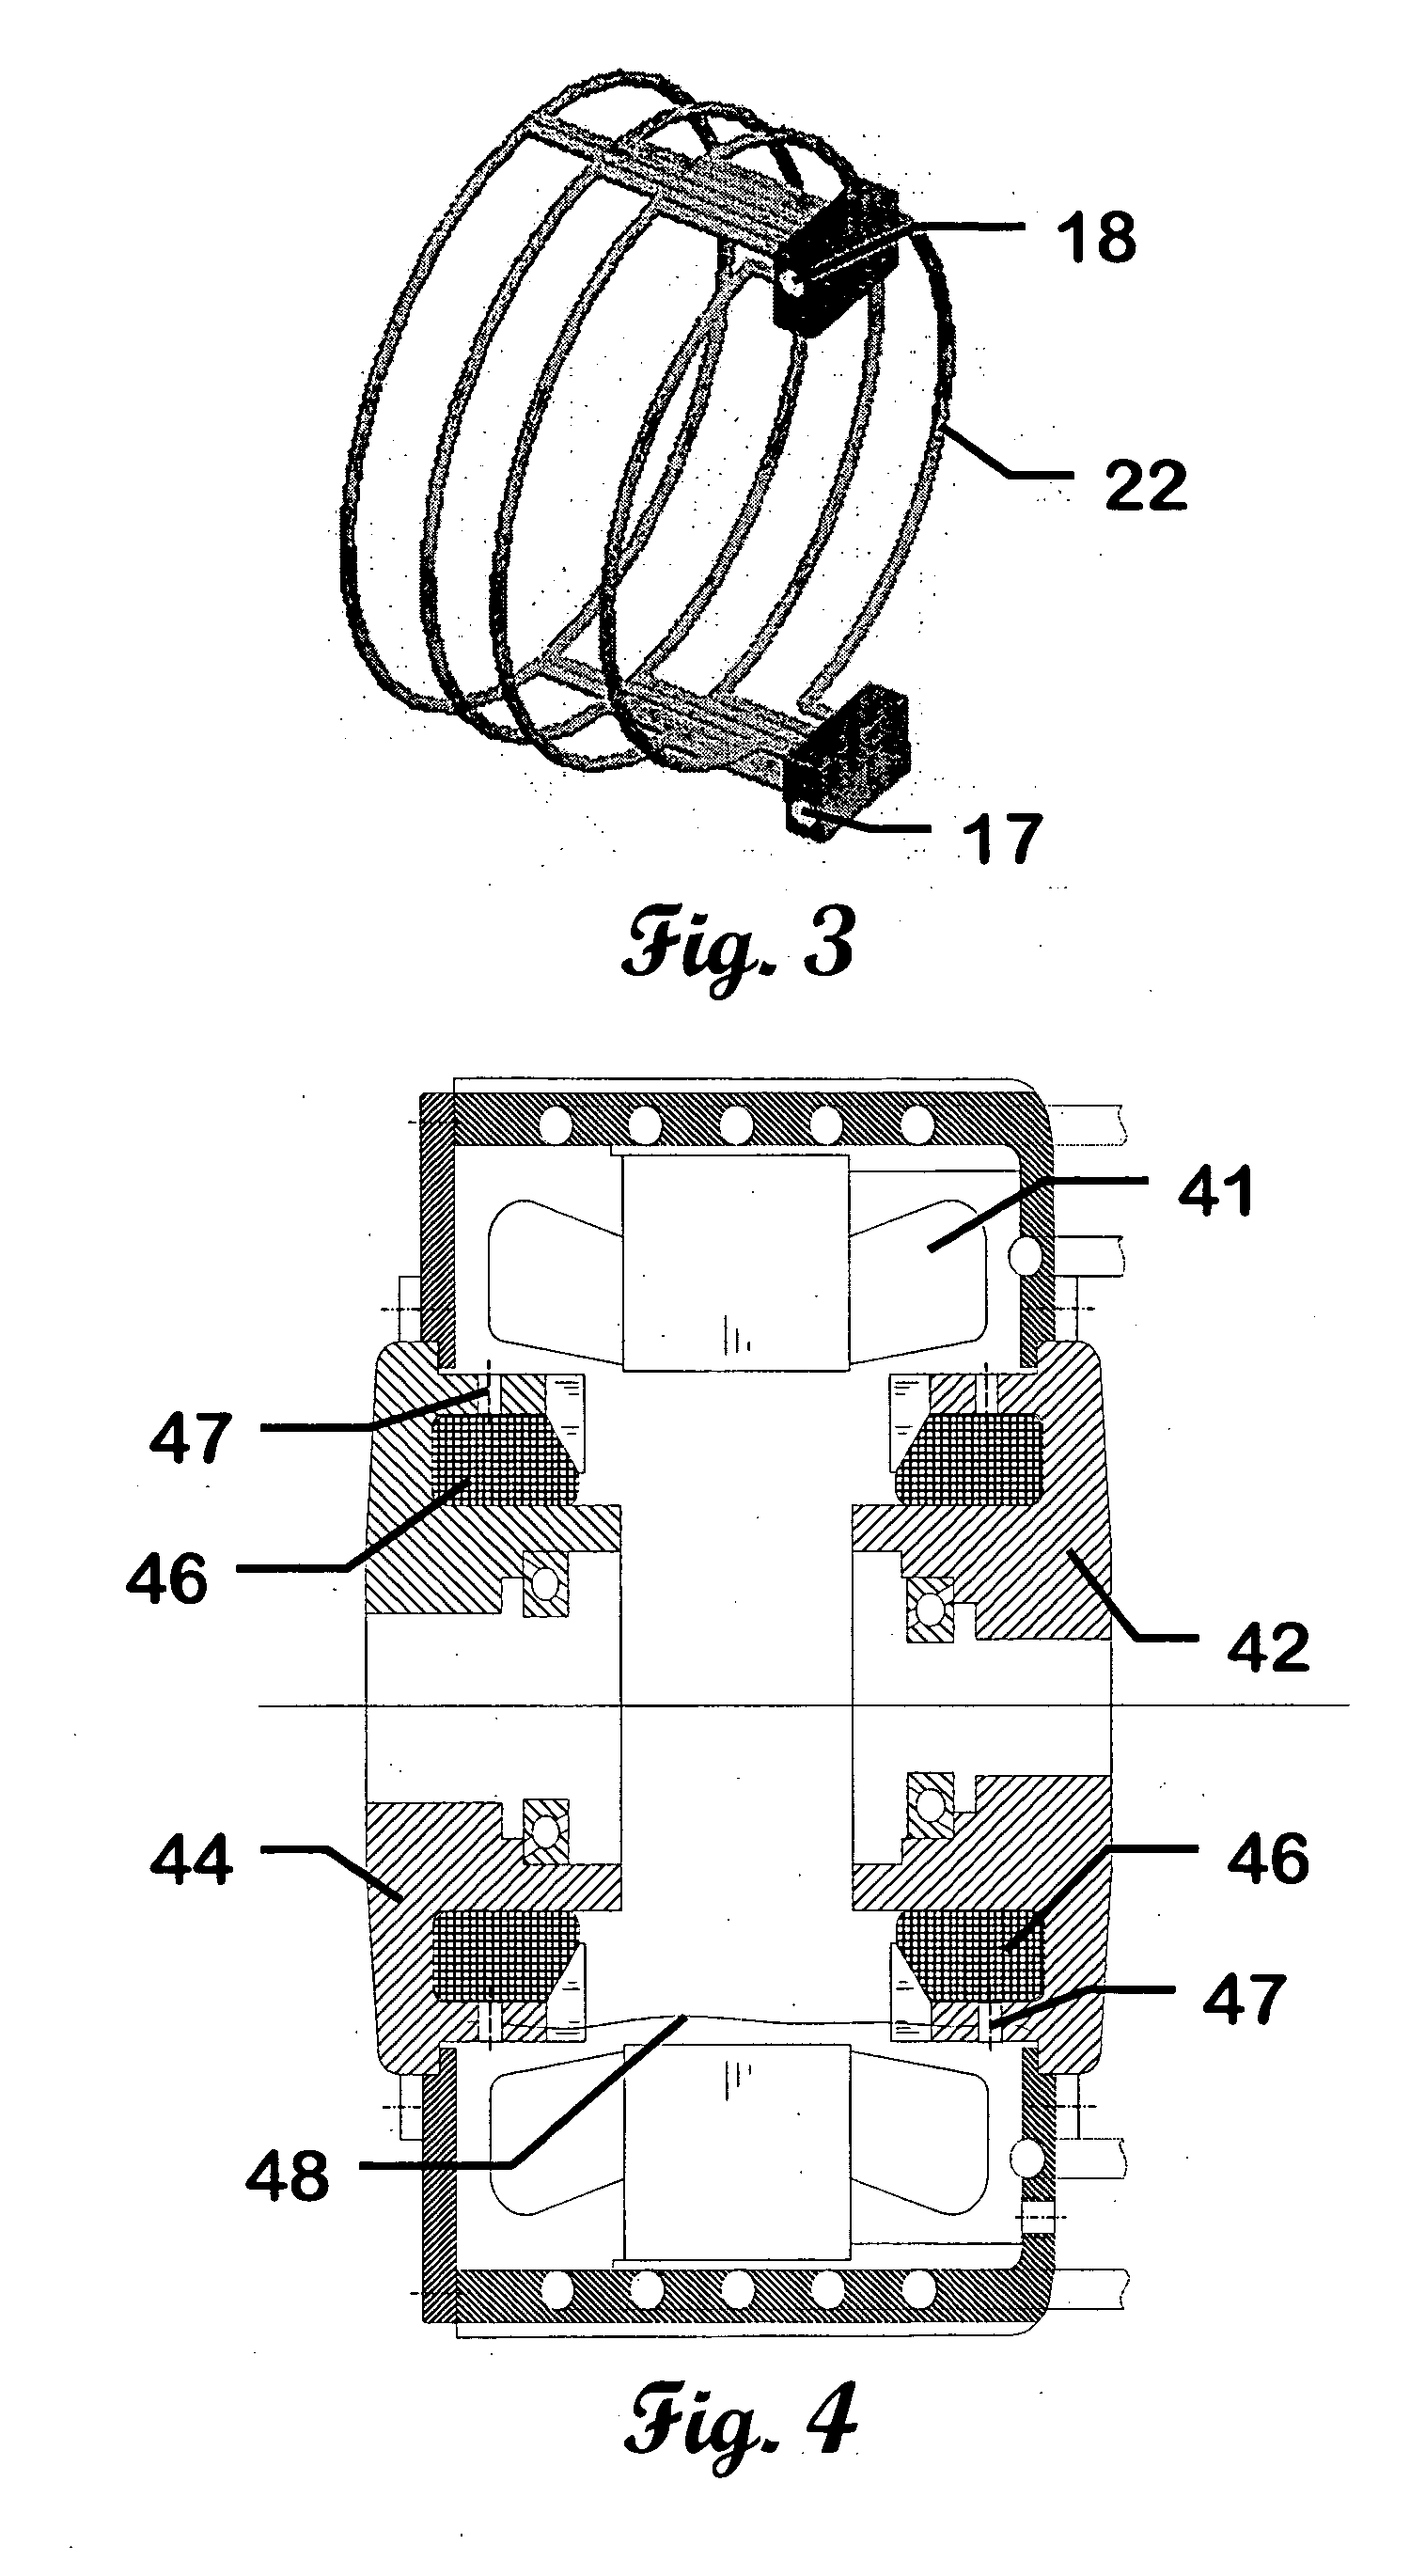 Motor frame cooling with hot liquid refrigerant and internal liquid